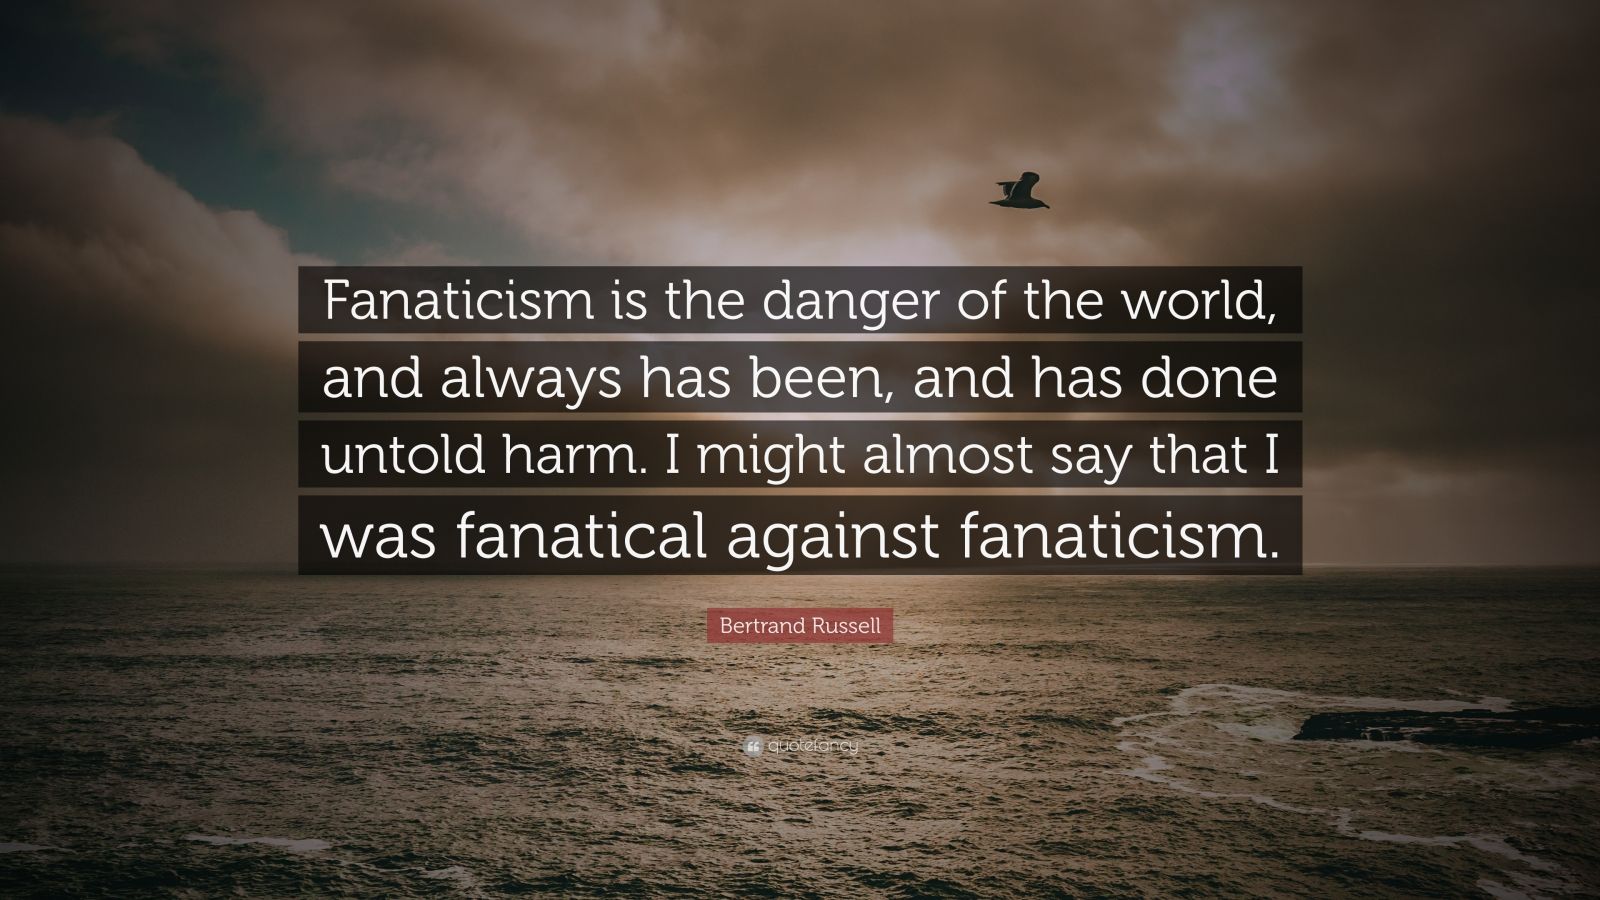 Bertrand Russell Quote: “Fanaticism is the danger of the world, and ...